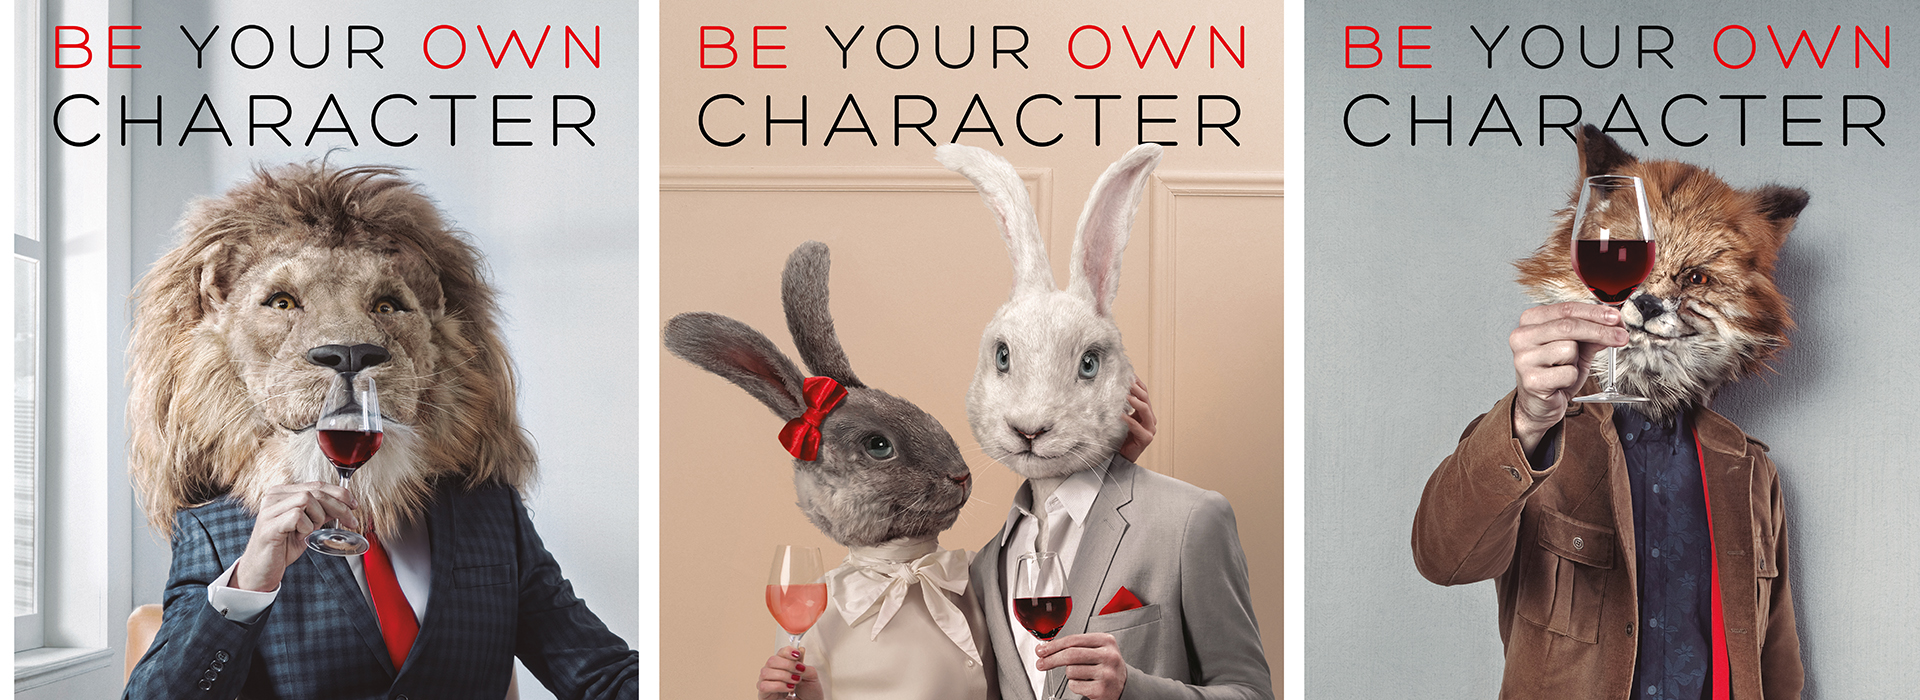 Key visual: Be You Own Character